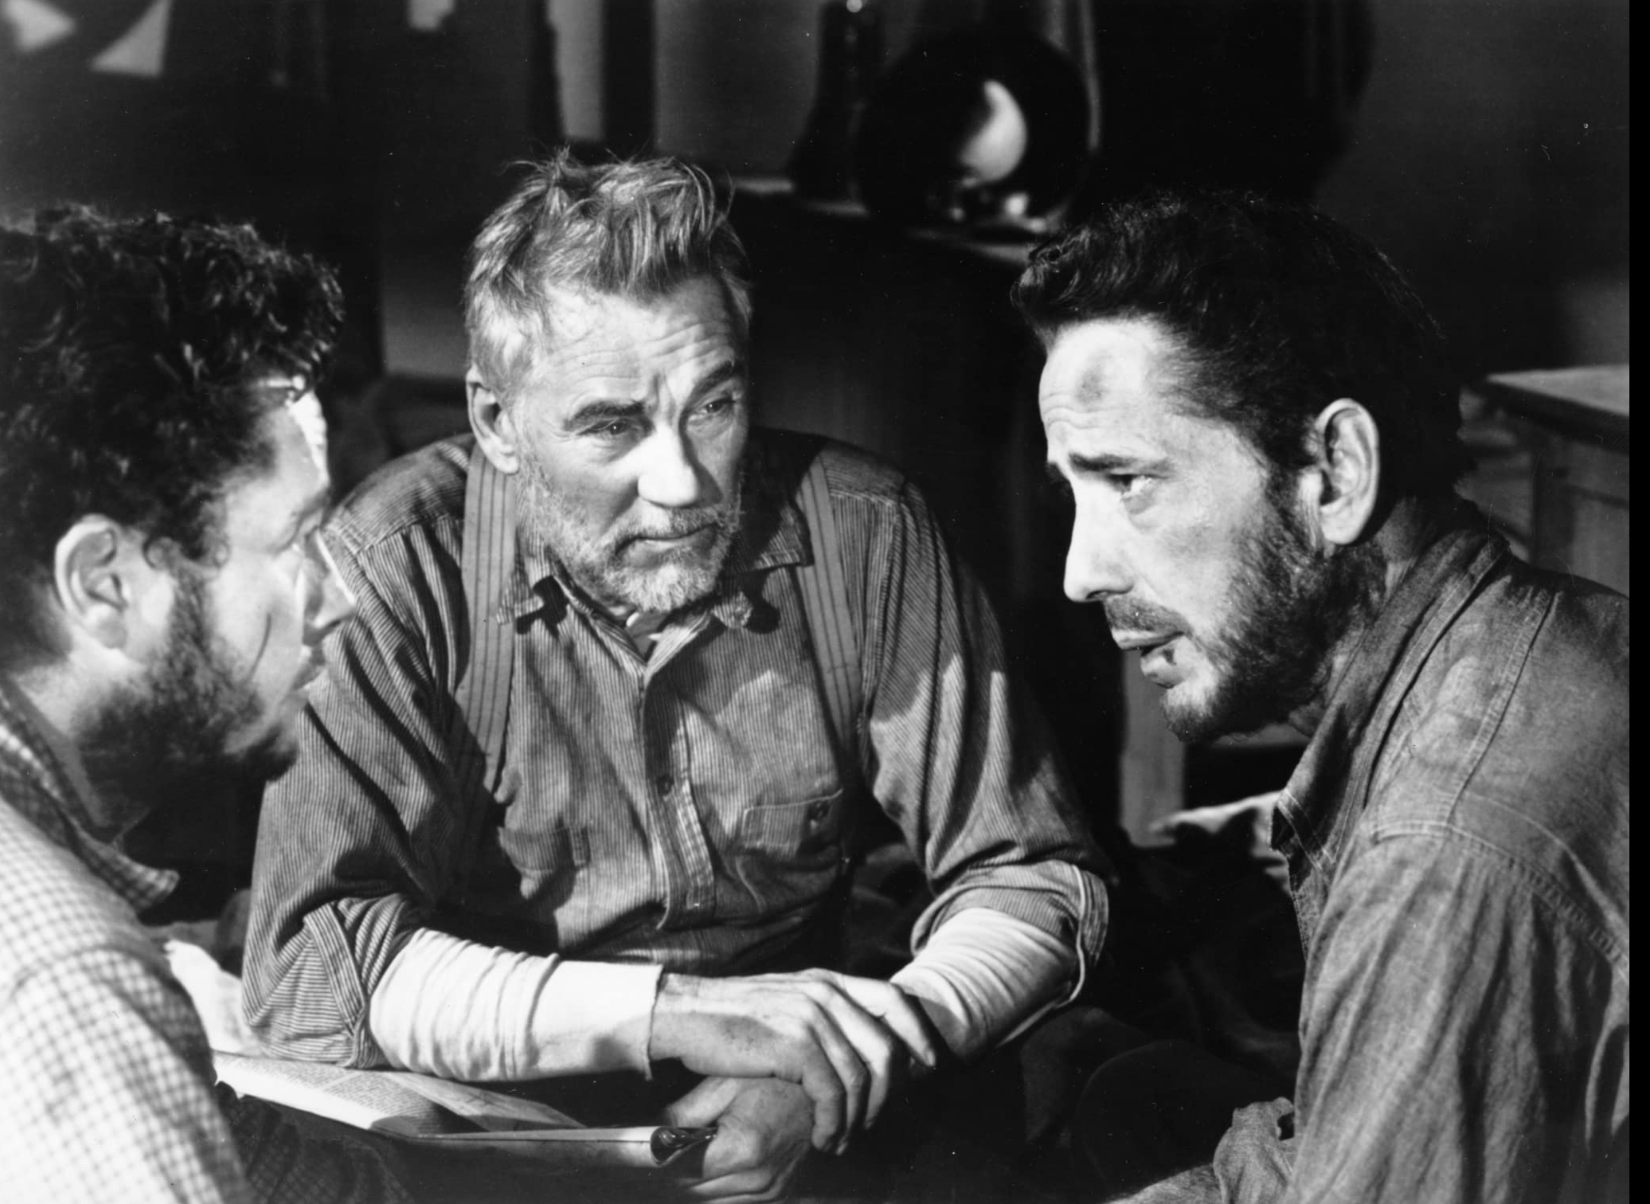 <p><b>Rotten Tomatoes Score:</b> 100%</p><p>This gritty tale of greed, directed by John Huston and starring Humphrey Bogart, remains as impactful today as it was upon release. The film follows the journey of three Americans in Mexico who set out to prospect for gold, only to have their camaraderie disintegrate under the strain of suspicion and paranoia. 'The Treasure of the Sierra Madre' won three Academy Awards, including Best Director and Best Supporting Actor for John Huston's father, Walter Huston, making them the first father-son duo to win Oscars for the same film. With its powerful performances and enduring themes, the film remains a classic of American cinema.It took home three Academy Awards, including Best Director and Best Supporting Actor for Huston's father, Walter Huston.</p><p><b>Critics said</b>:“Remade but never duplicated, this darkly humorous morality tale represents John Huston at his finest.” <a href="https://www.rottentomatoes.com/m/treasure_of_the_sierra_madre/reviews?intcmp=rt-scorecard_tomatometer-reviews">RT</a></p>